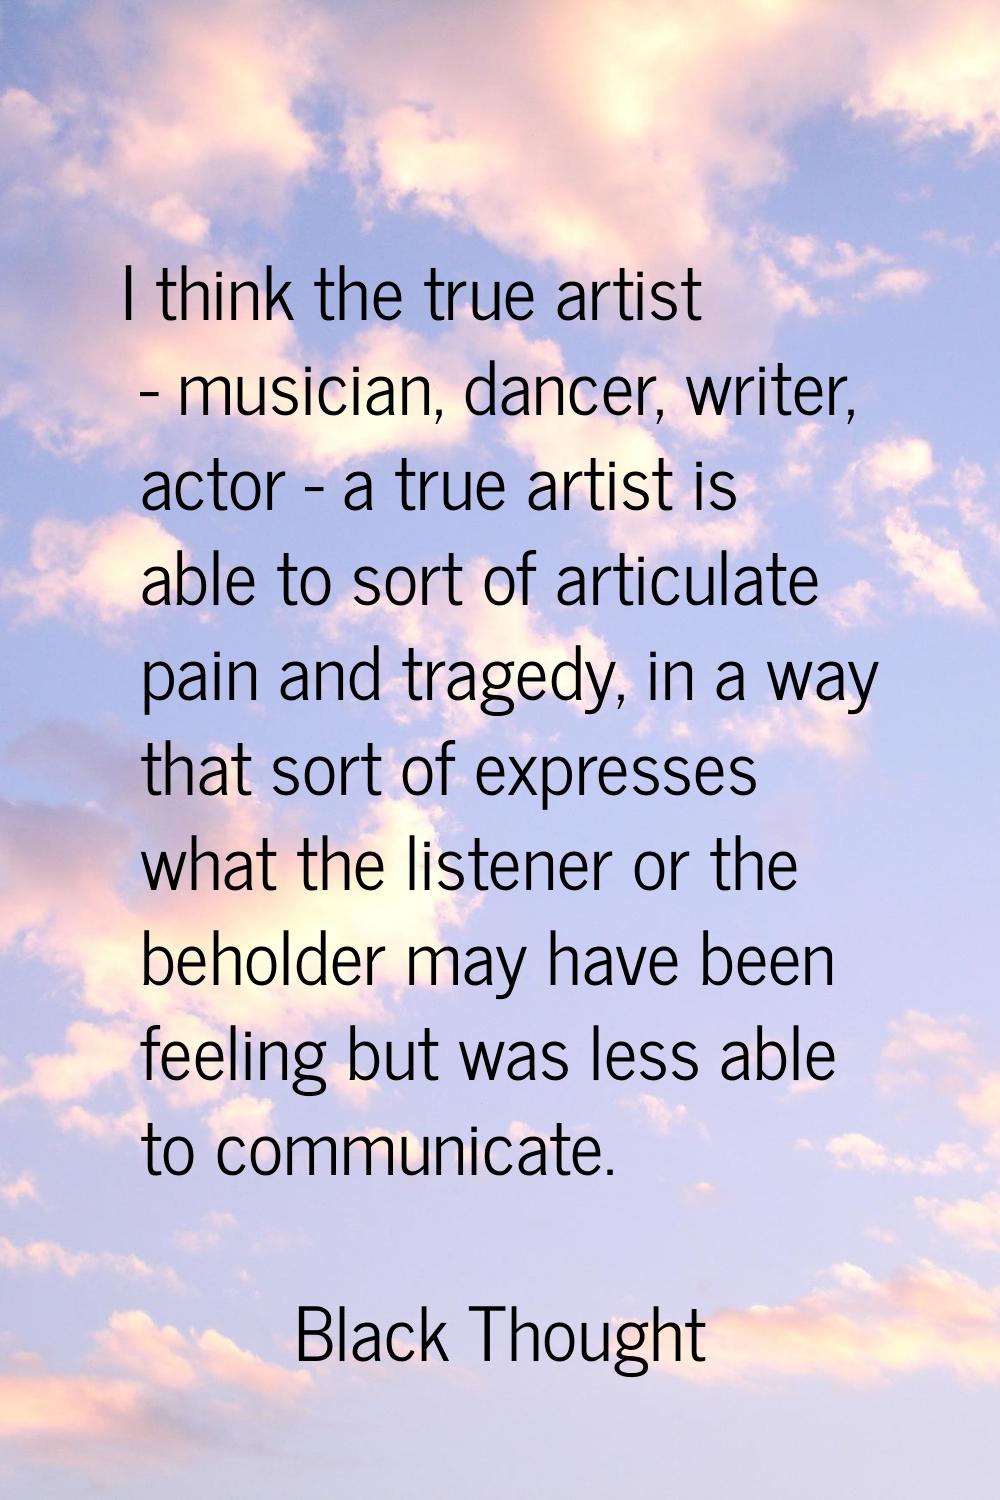 I think the true artist - musician, dancer, writer, actor - a true artist is able to sort of articu